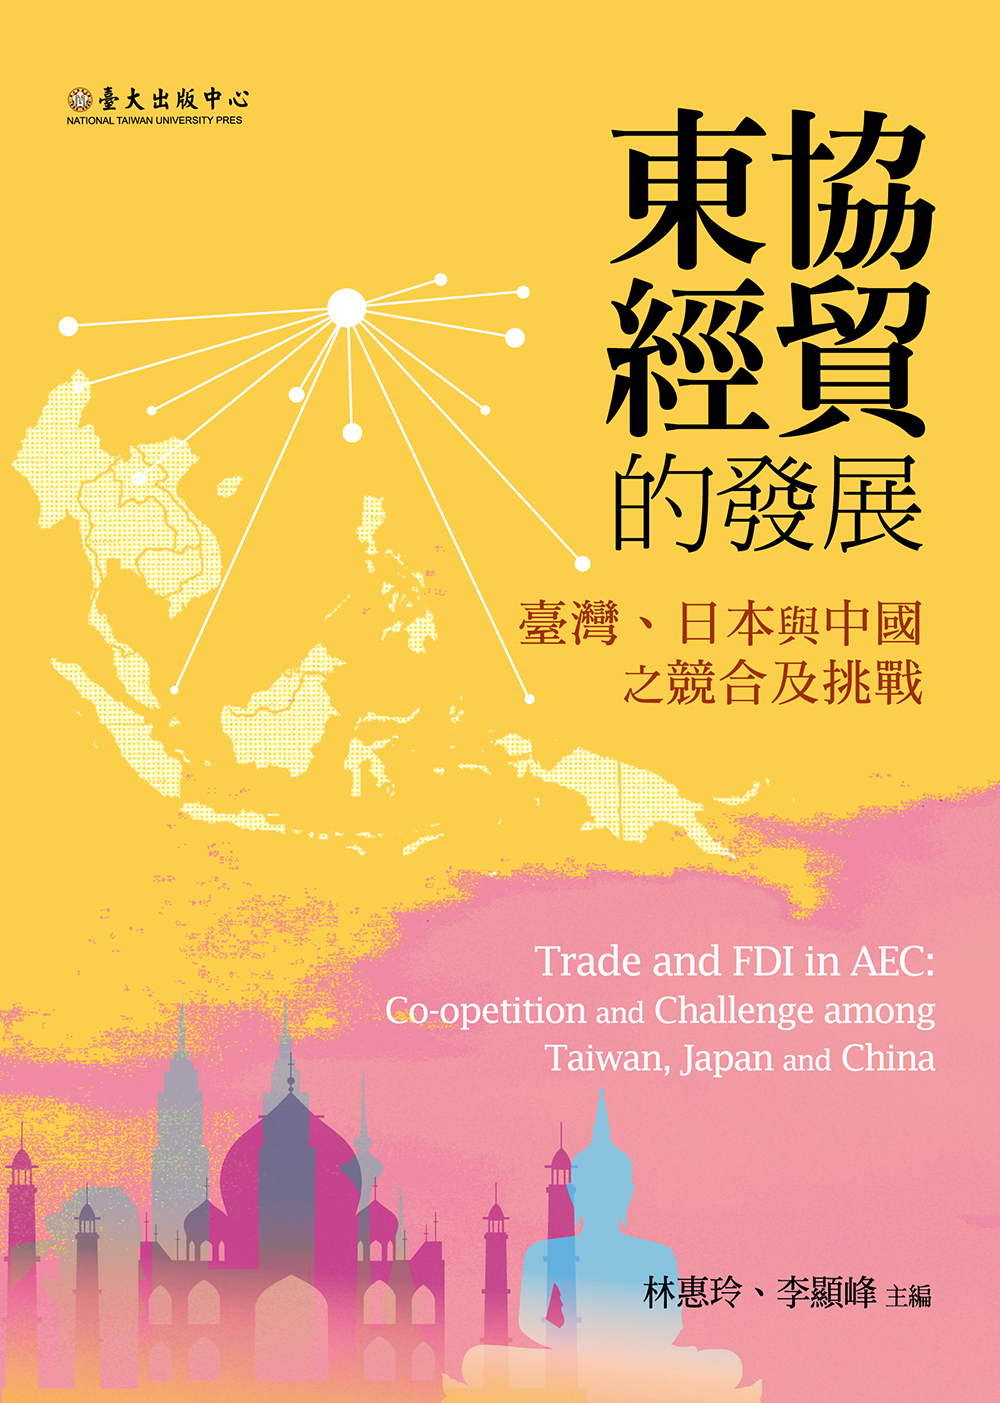 Trade and FDI in AEC: Co-opetition and Challenge among Taiwan, Japan and China